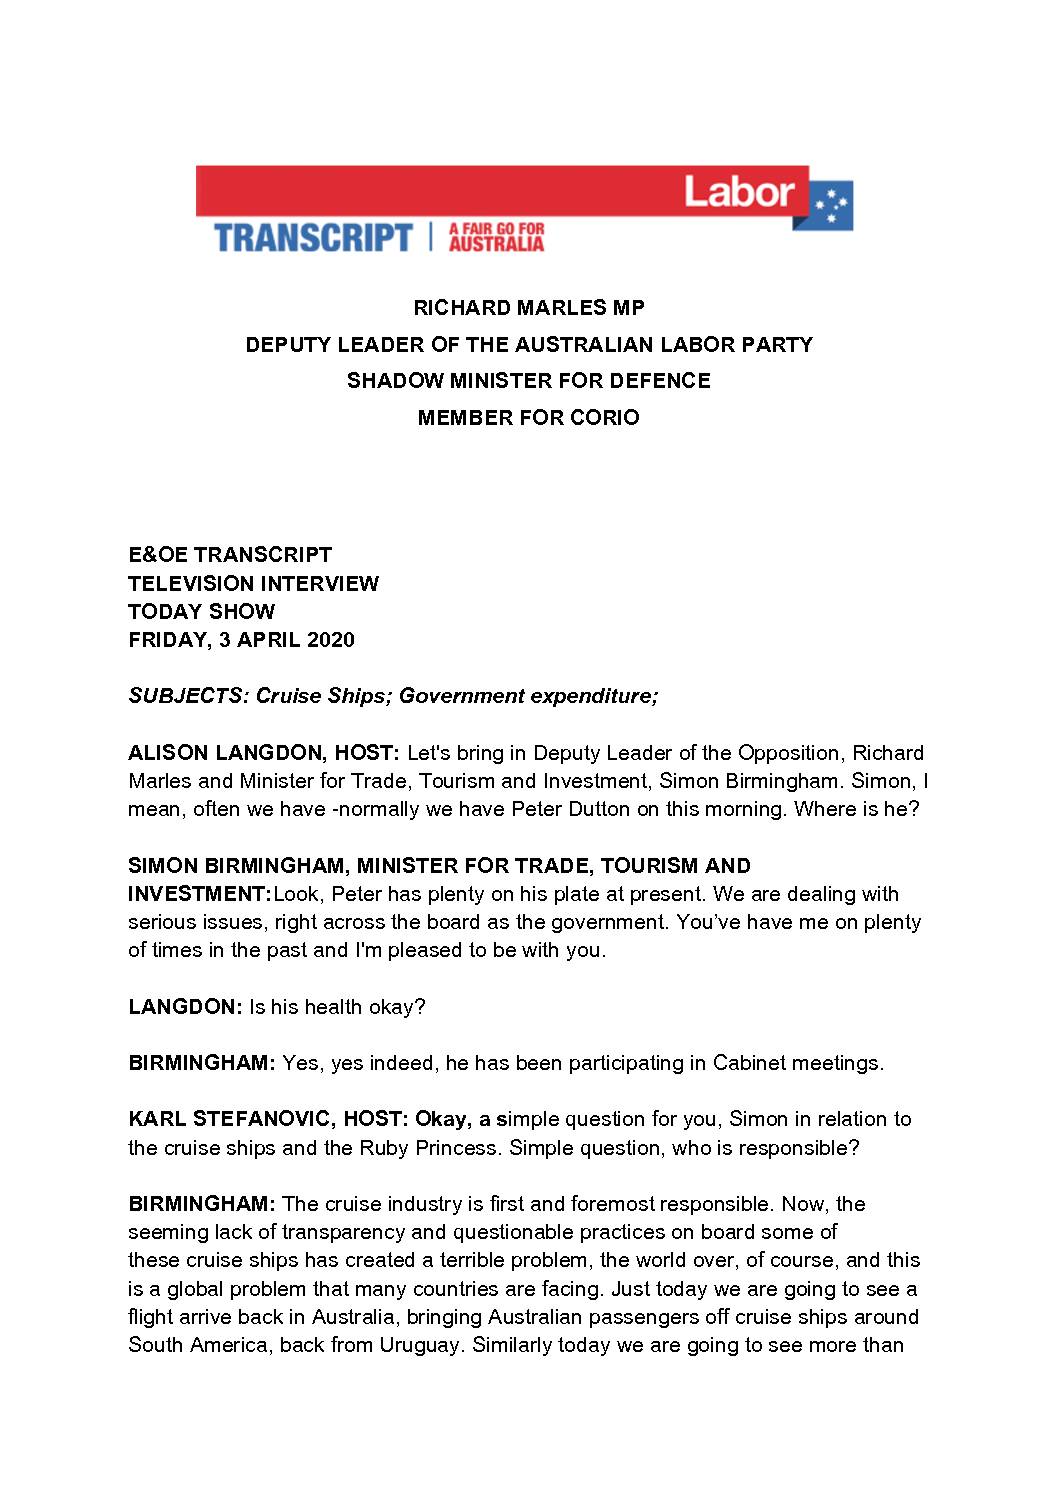 20.04.03-CHANNEL-9-THE-TODAY-SHOW-TRANSCRIPT